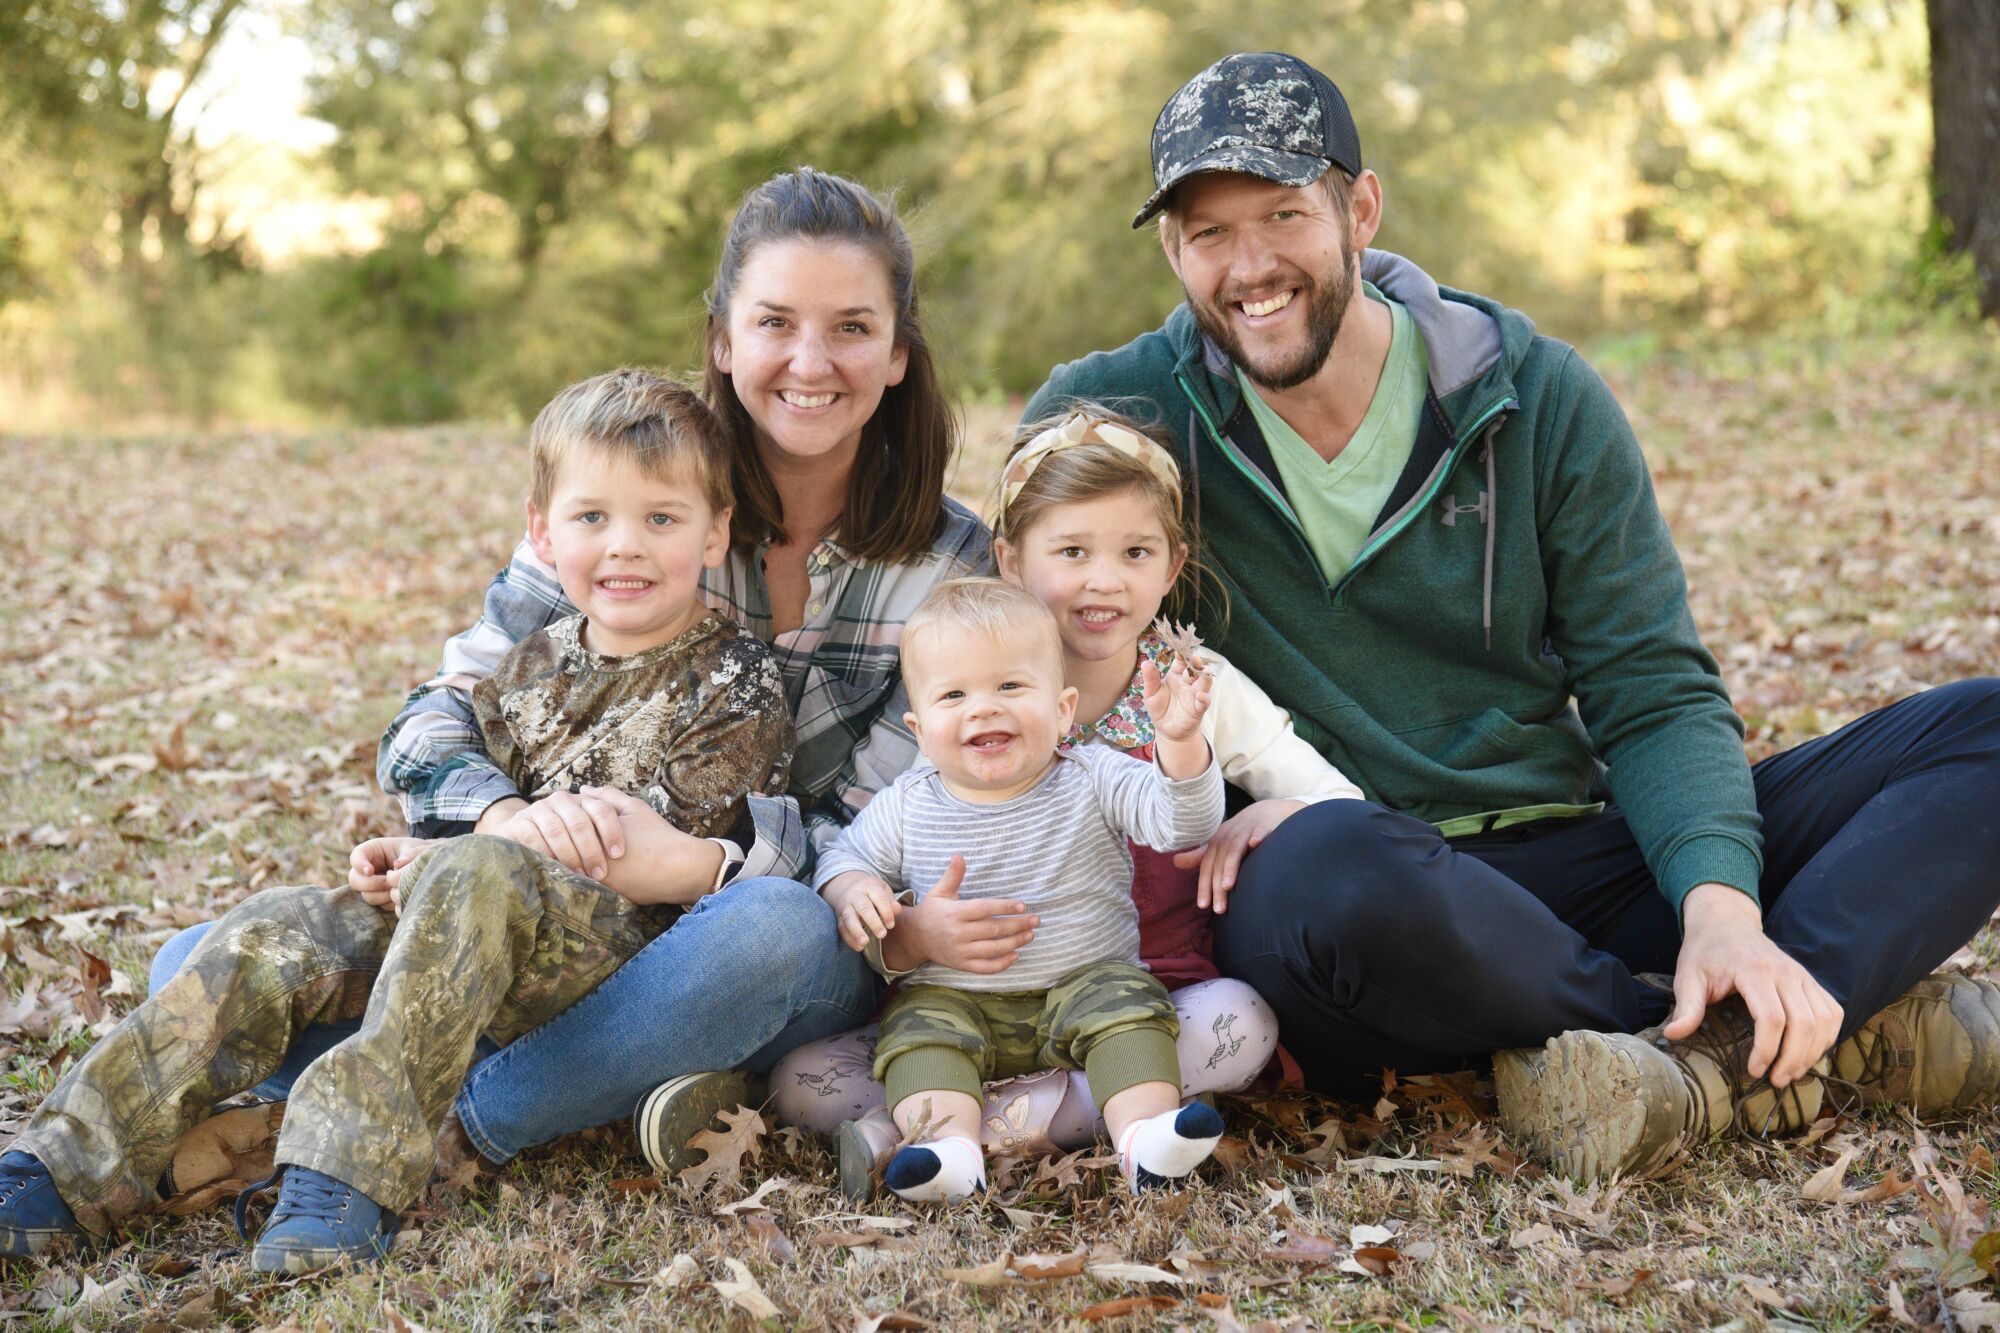 Dodgers pitcher Clayton Kershaw with his wife, Ellen, and children (from left) Charley, Cooper and Cali.